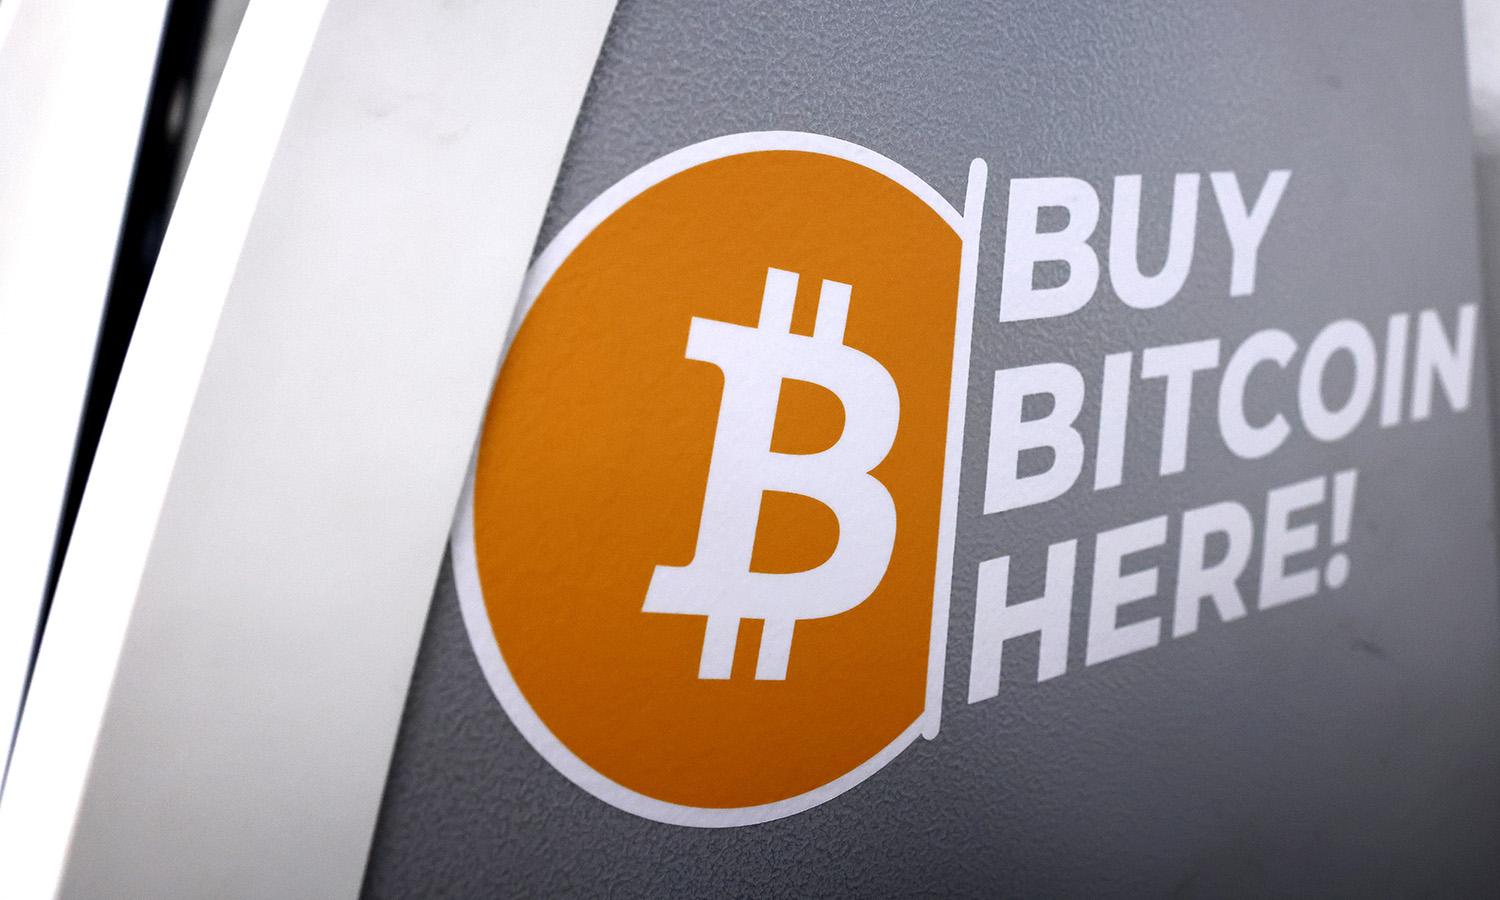 The Bitcoin logo is displayed on the side of a Bitcoin ATM on Nov. 10, 2021, in Los Angeles. (Photo by Mario Tama/Getty Images)